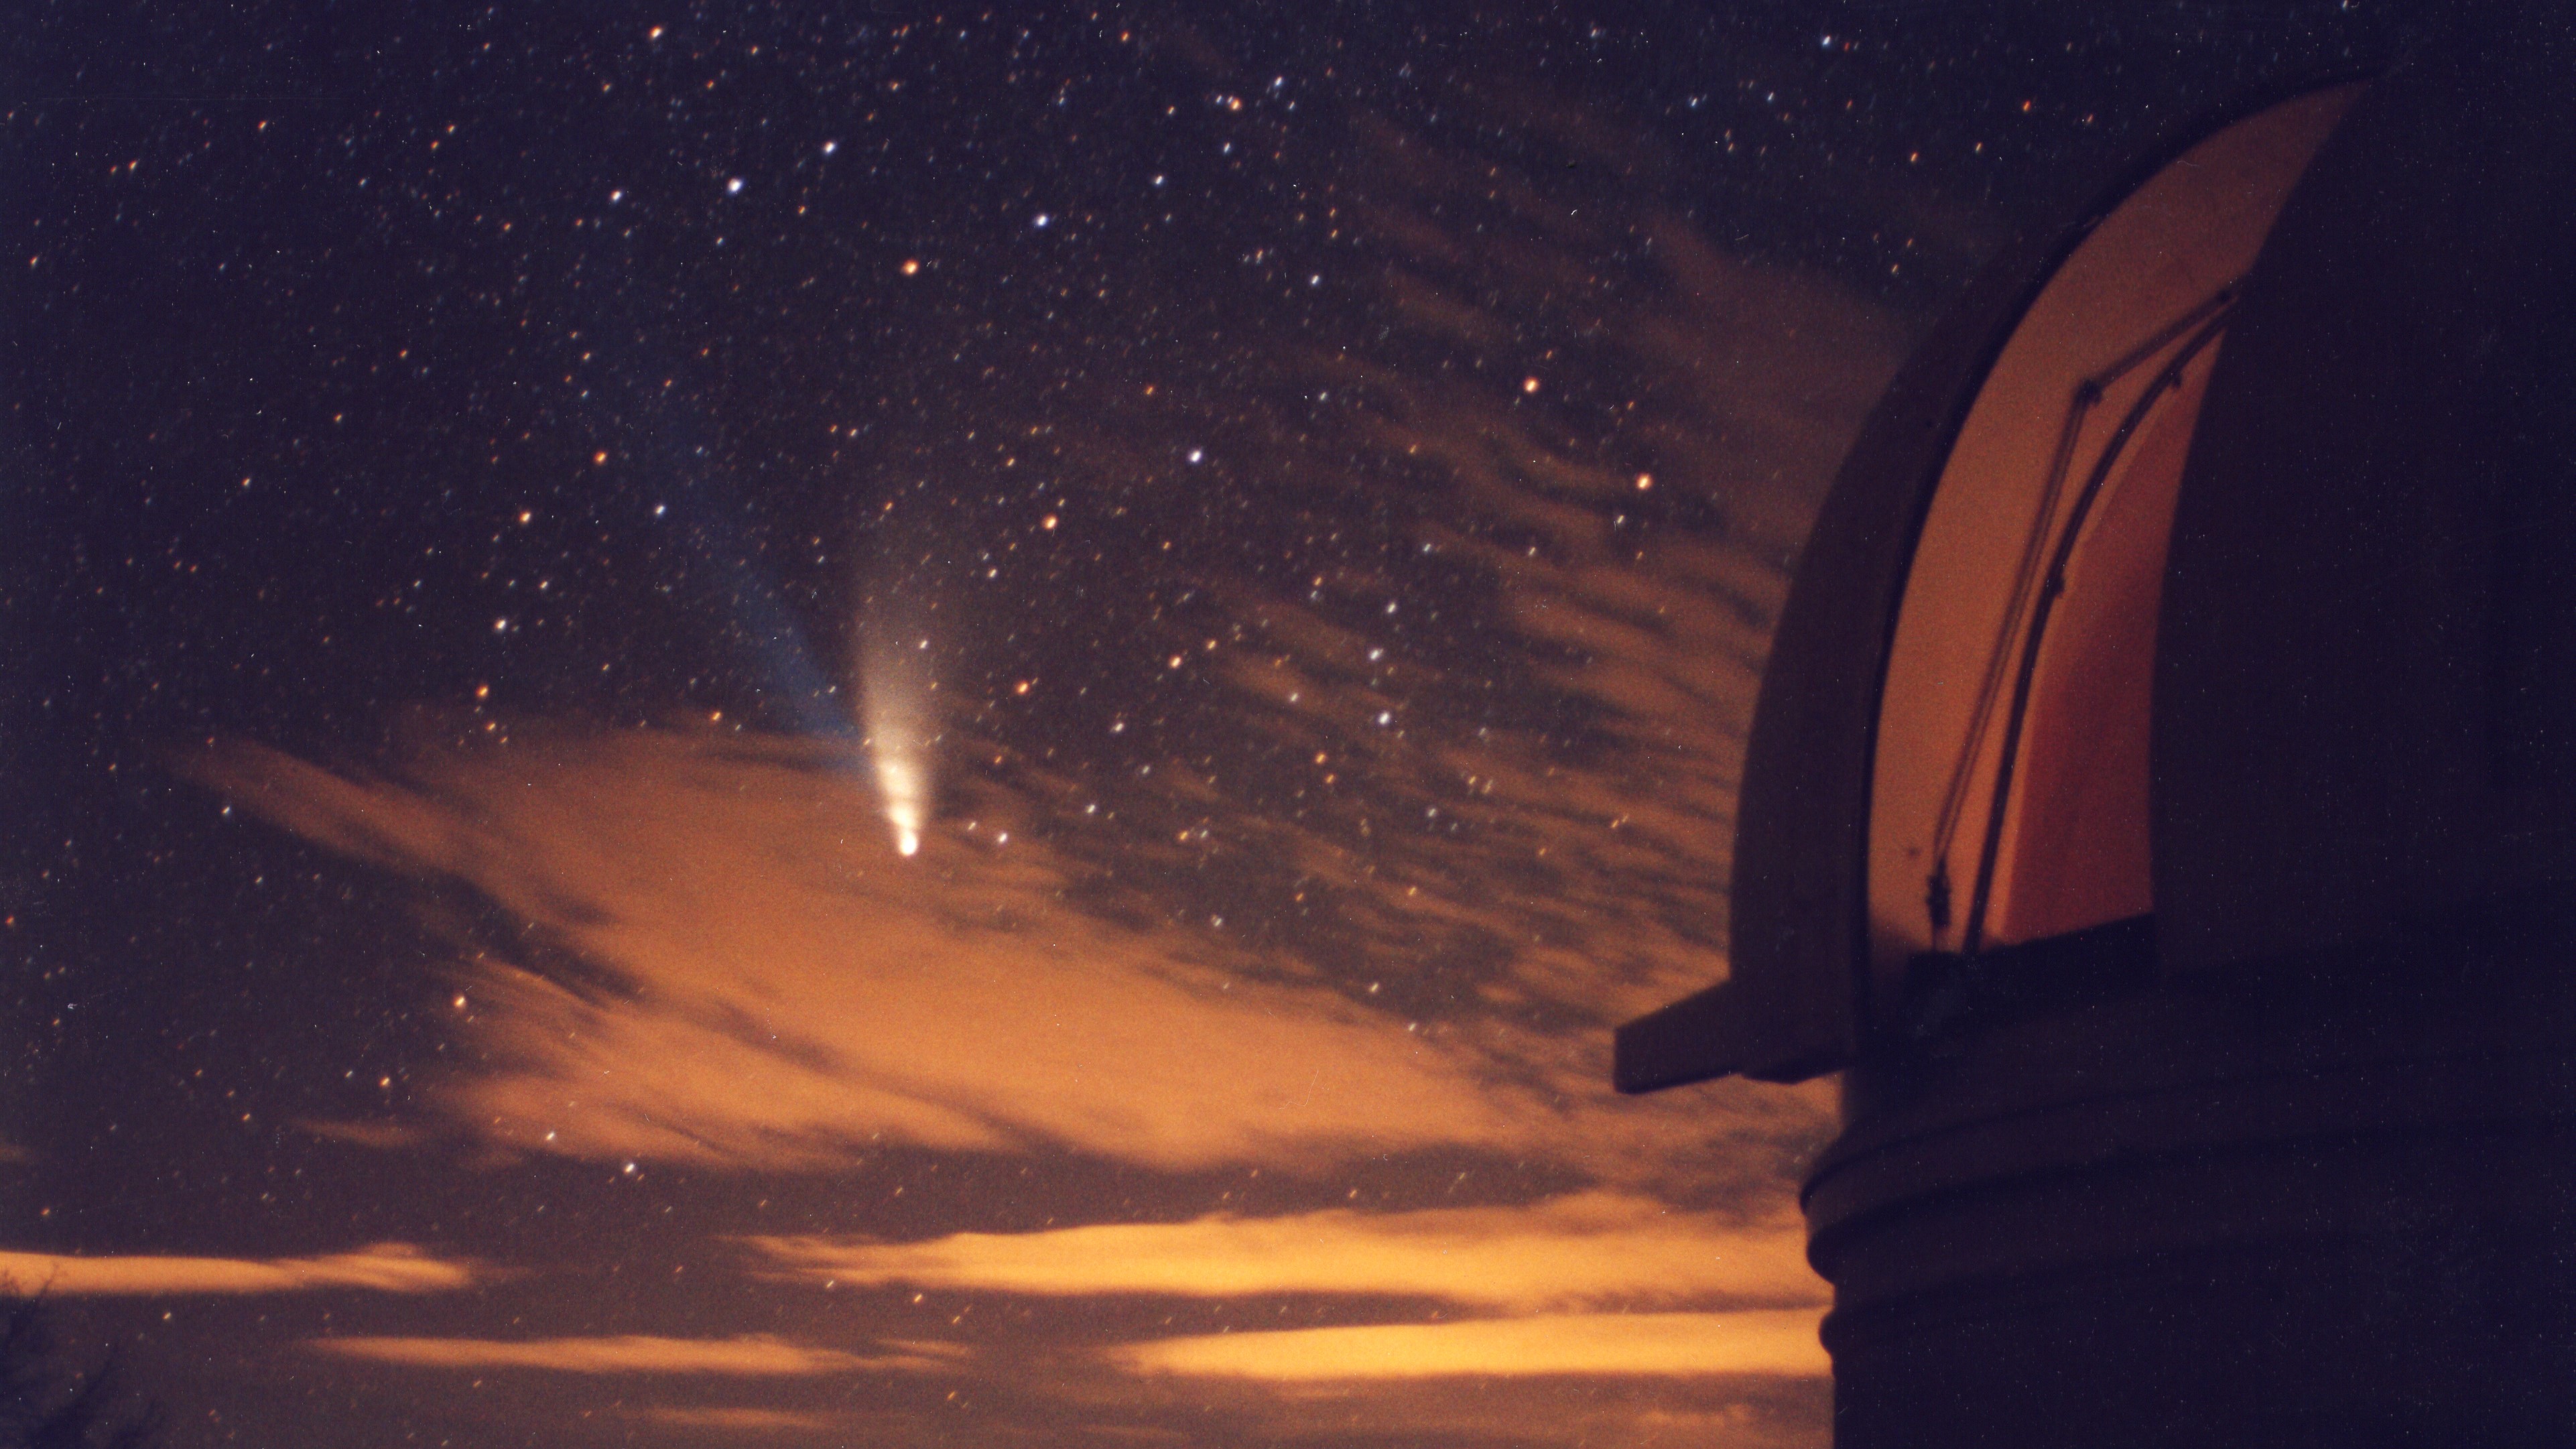 Hale-Bopp comet won't return to the inner solar system for thousands of years. This image shows Comet Hale-Bopp with Palomar Mountain's 48 inch telescope in the foreground.